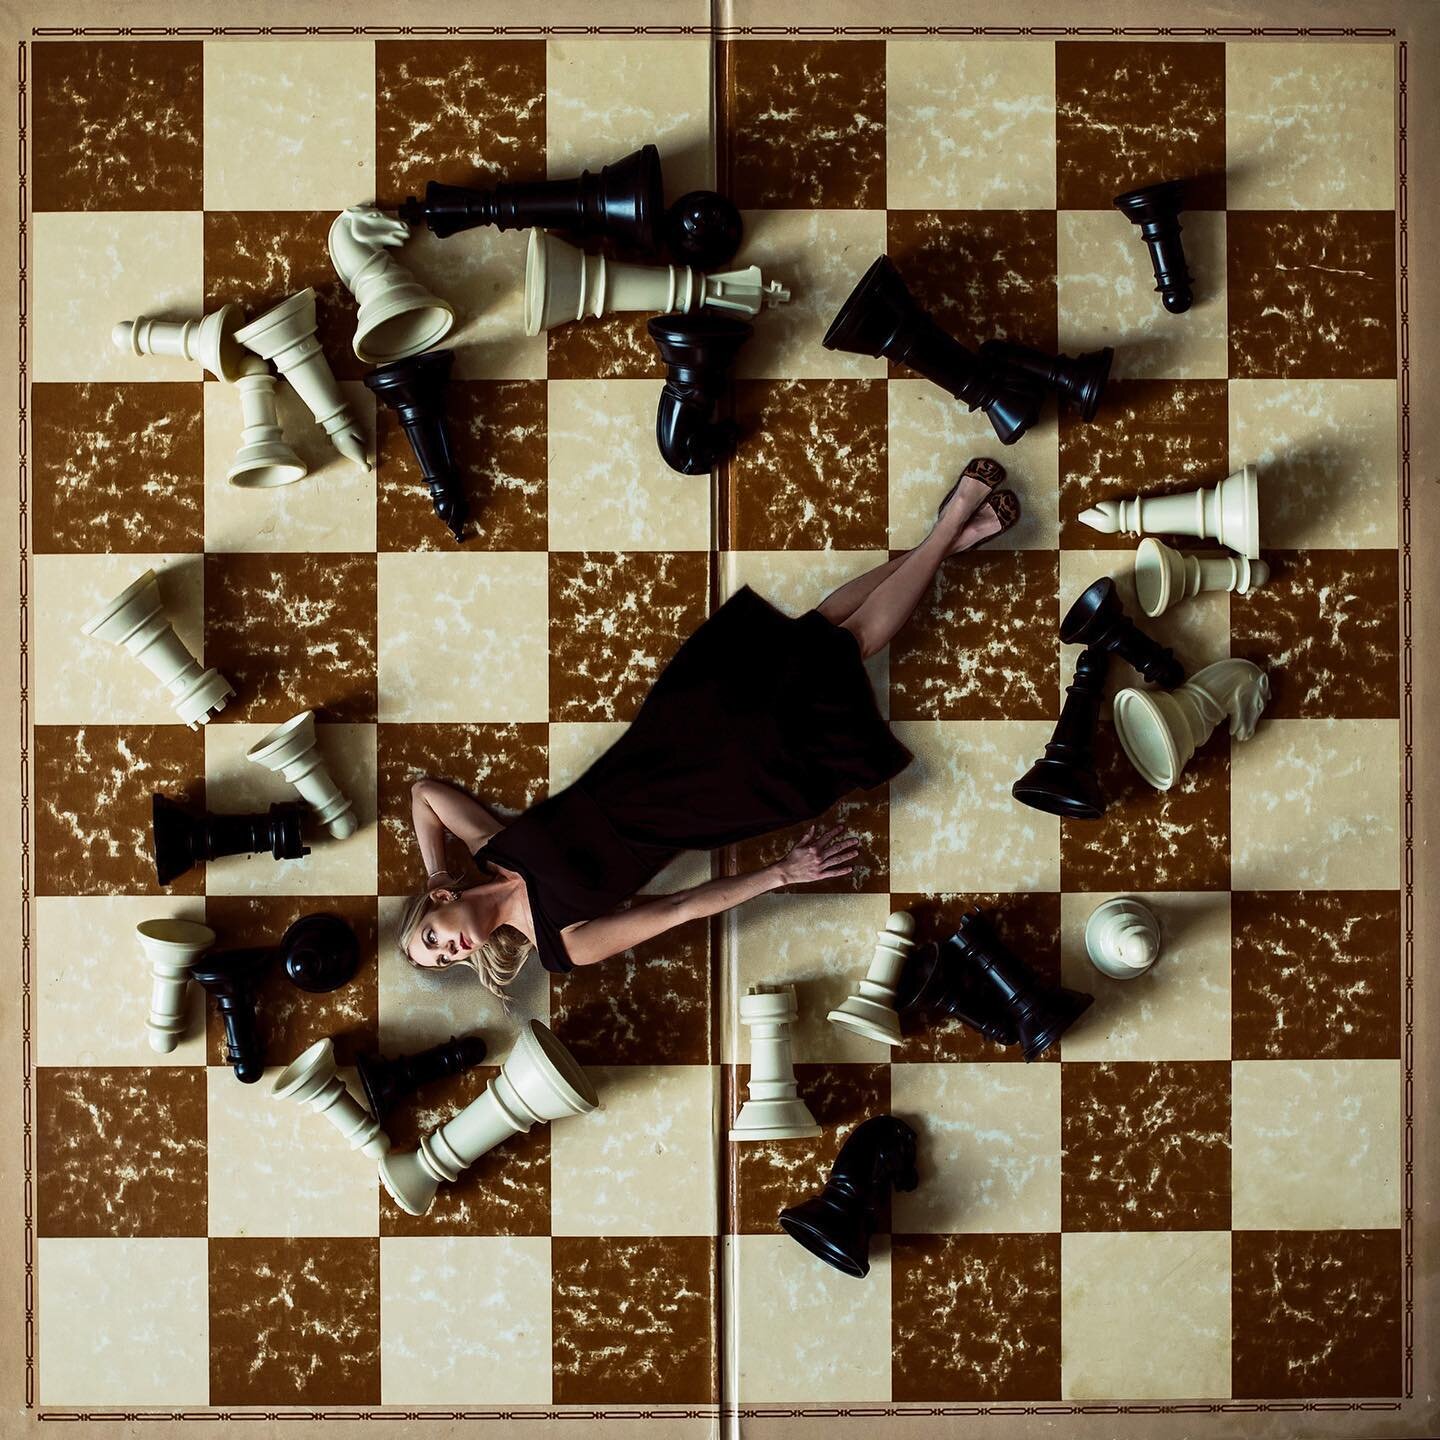 Just combining my love for a few of my favorite nerdy hobbies...Chess, (which is a rediscovered hobby) photography, (which I tried to tell Kevin was actually not that nerdy and he disagreed) and photoshop. (yes I do consider PS a hobby because I can 